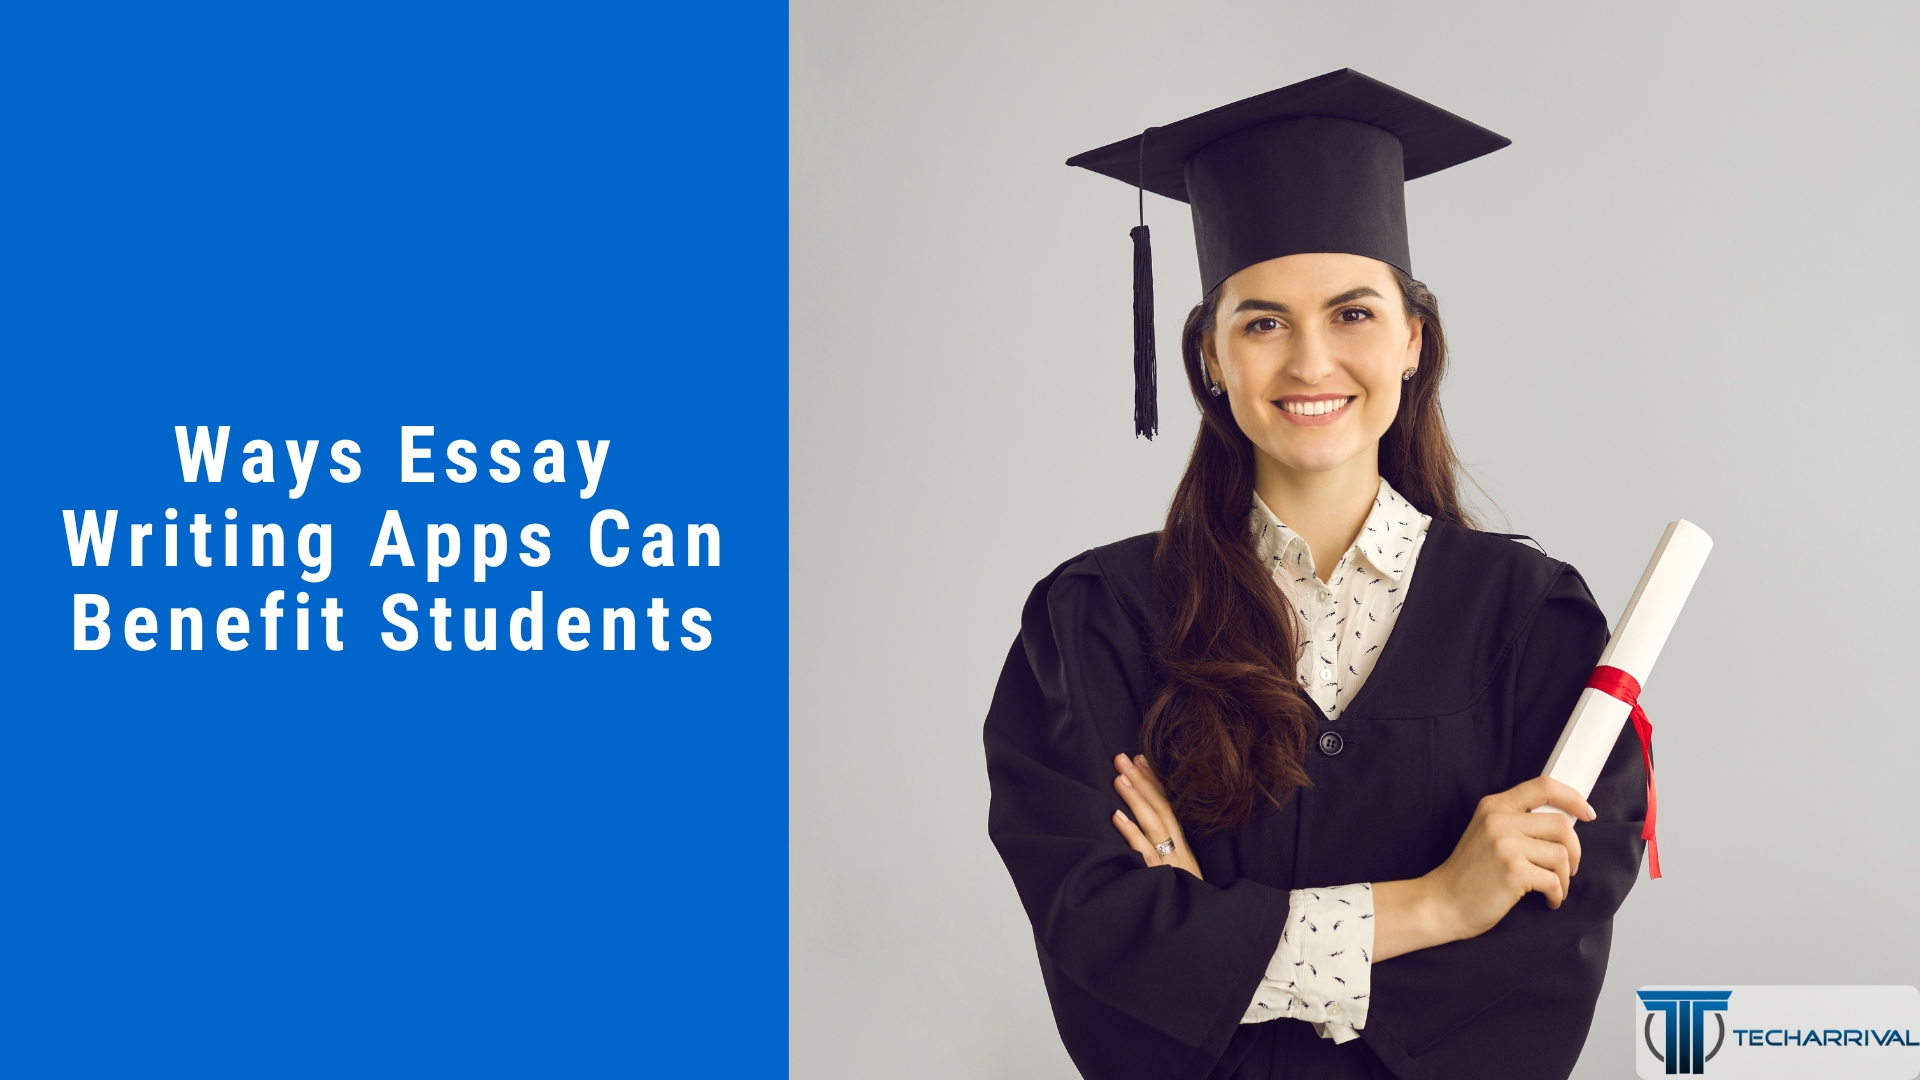 5-ways-essay-writing-apps-can-benefit-students